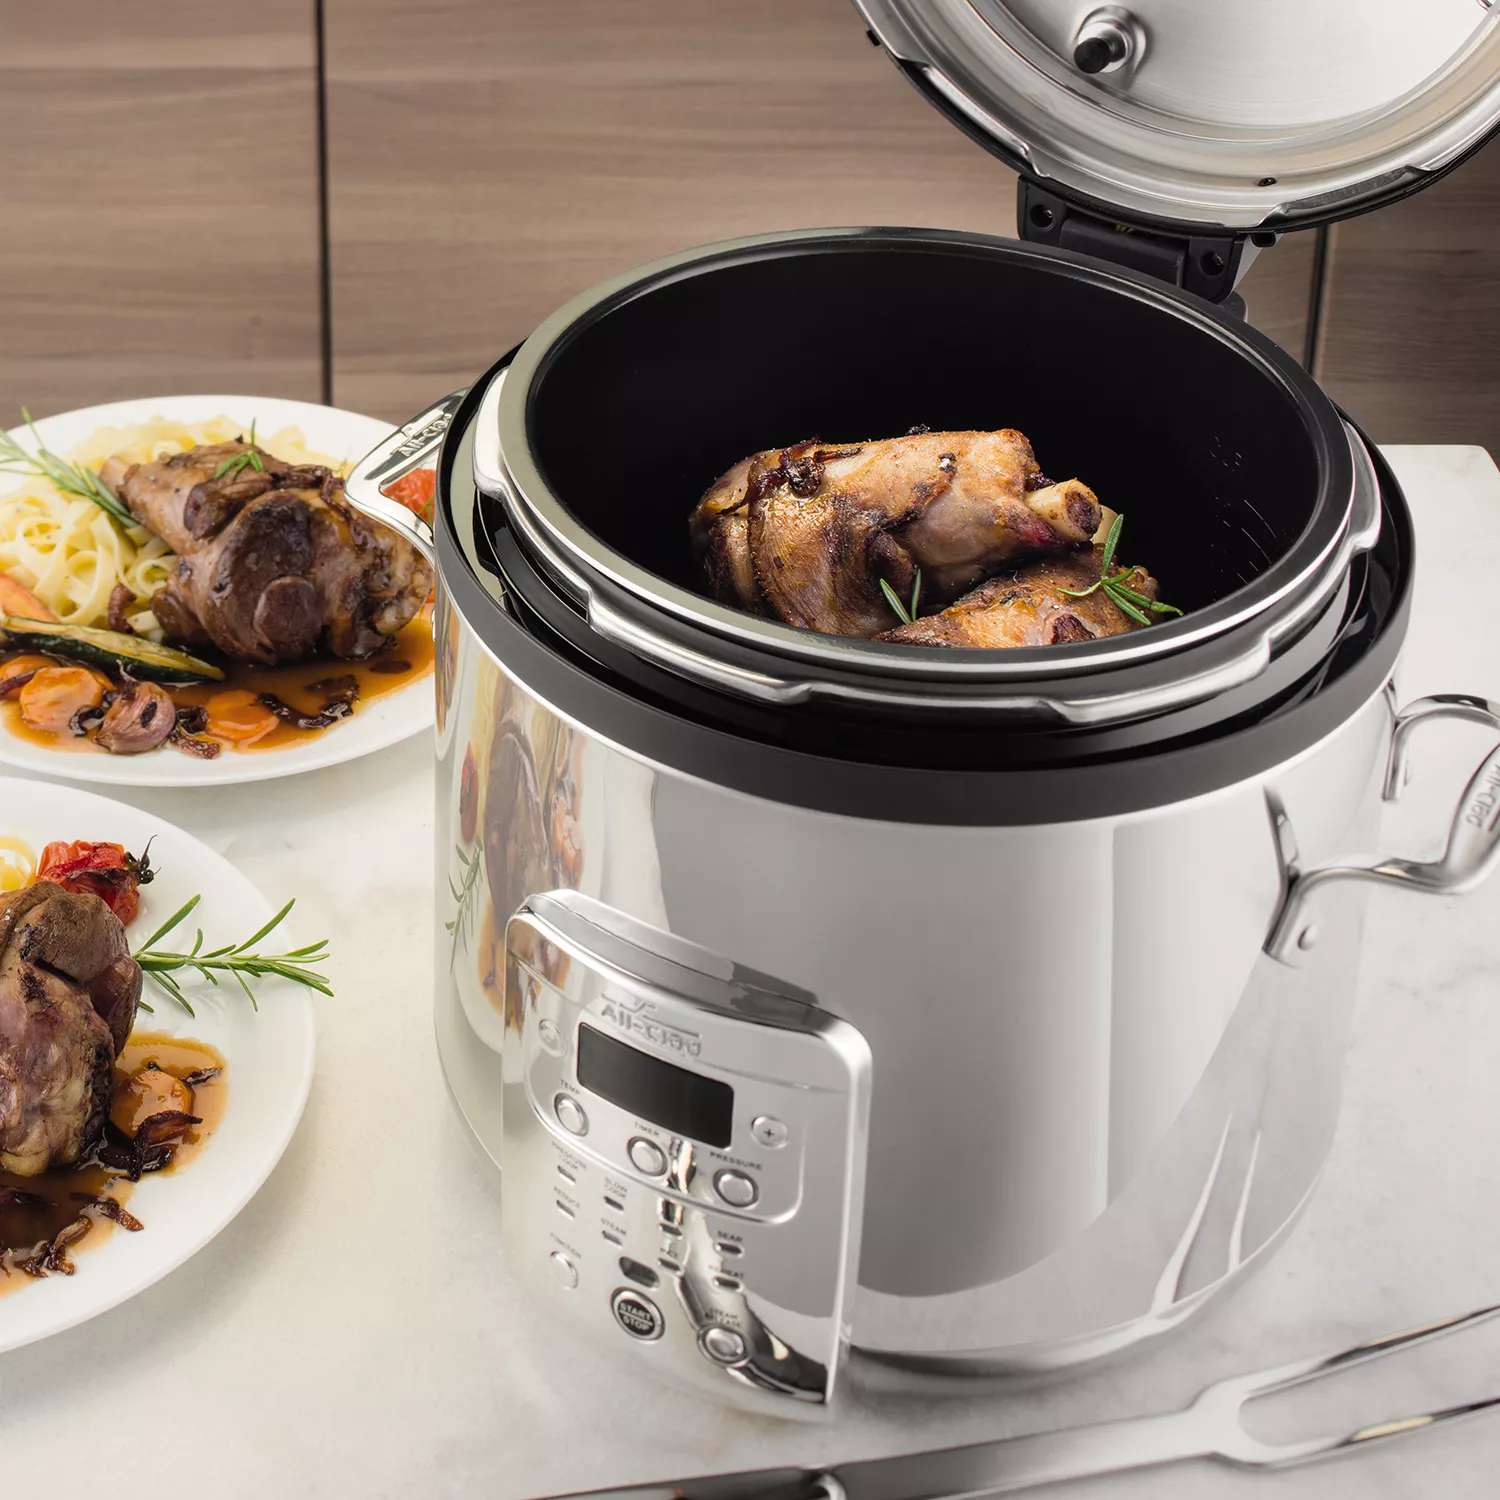 All-Clad 4 Qt. Electric Slow Cooker with Ceramic Insert